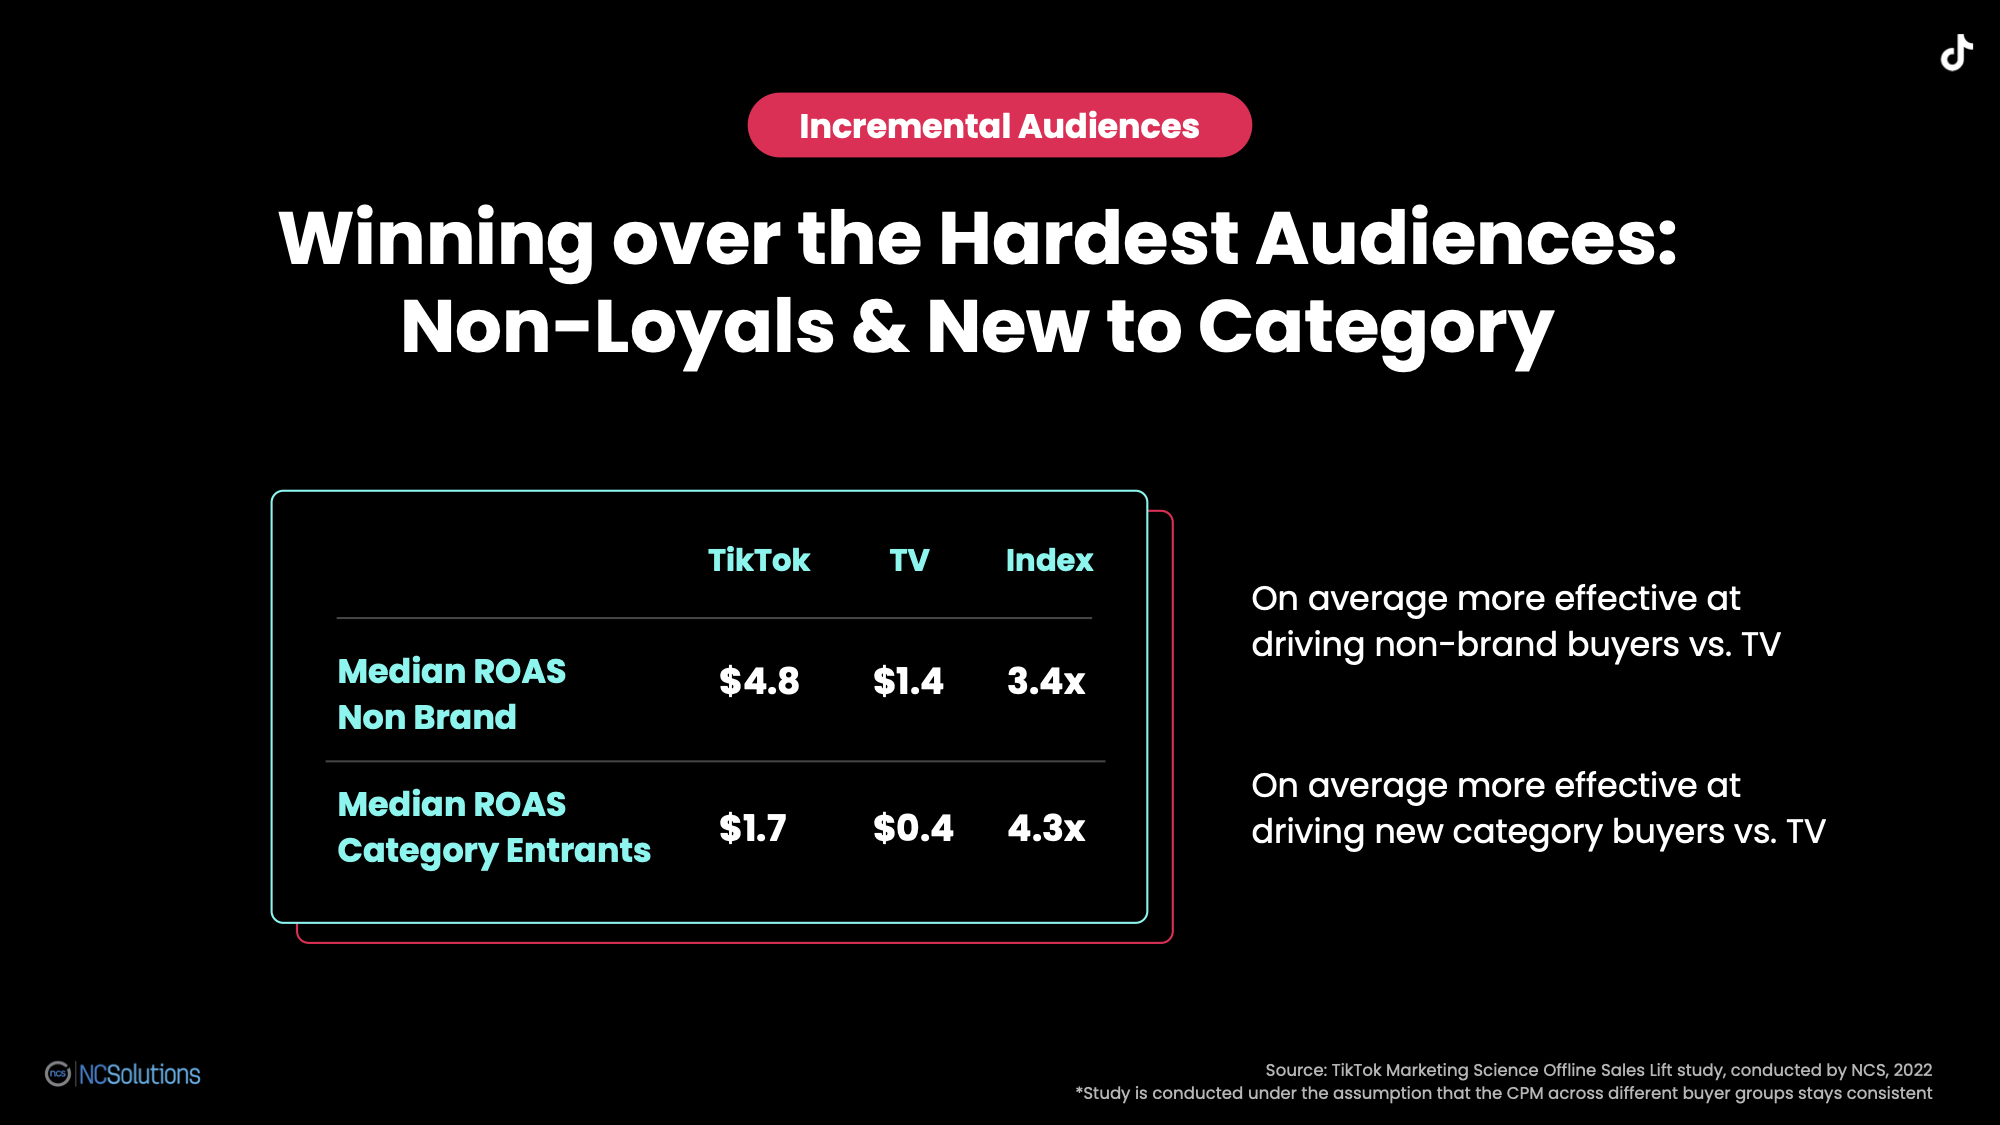 NCS measurement shows how TikTok ads, on average, is more effective and winning over non-brand buyers and new category buyers vs. TV ads.